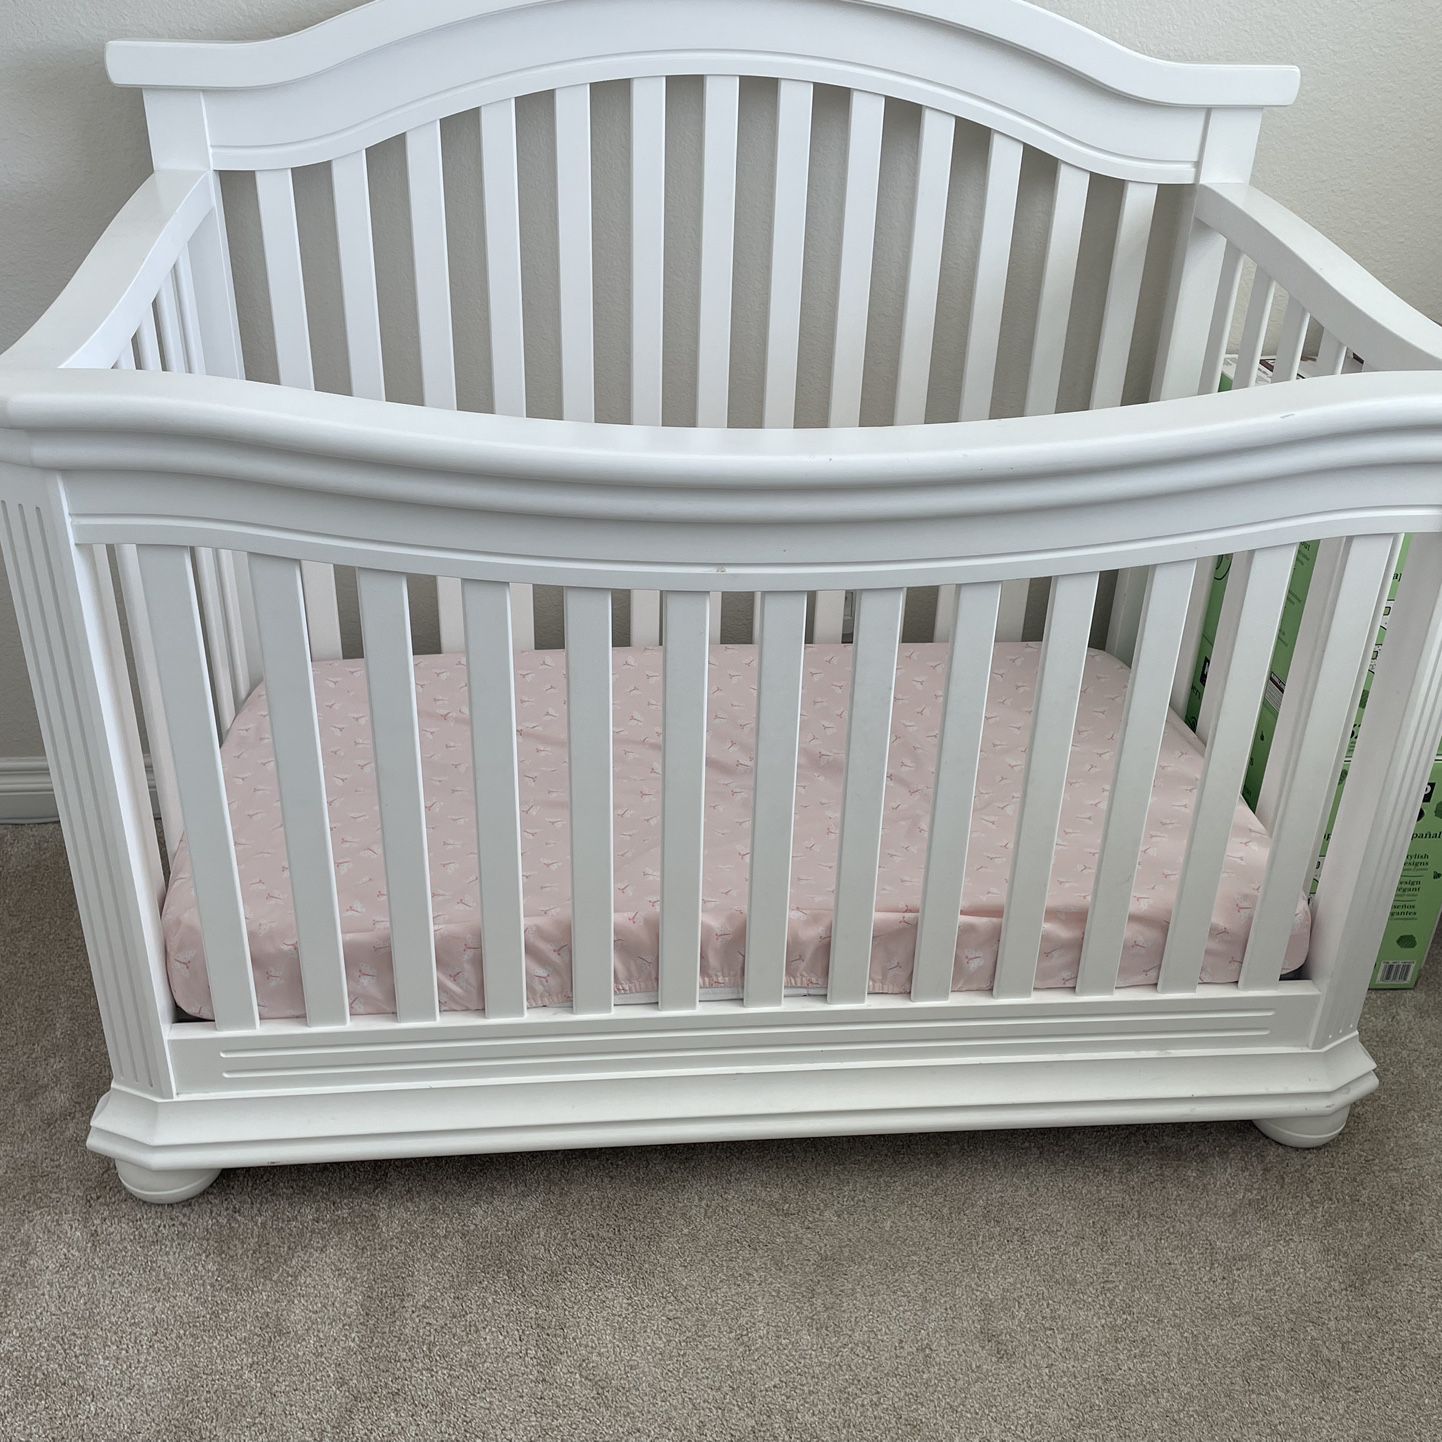 Baby Nursery Set: Convertible Crib, Rocker And Changing Table